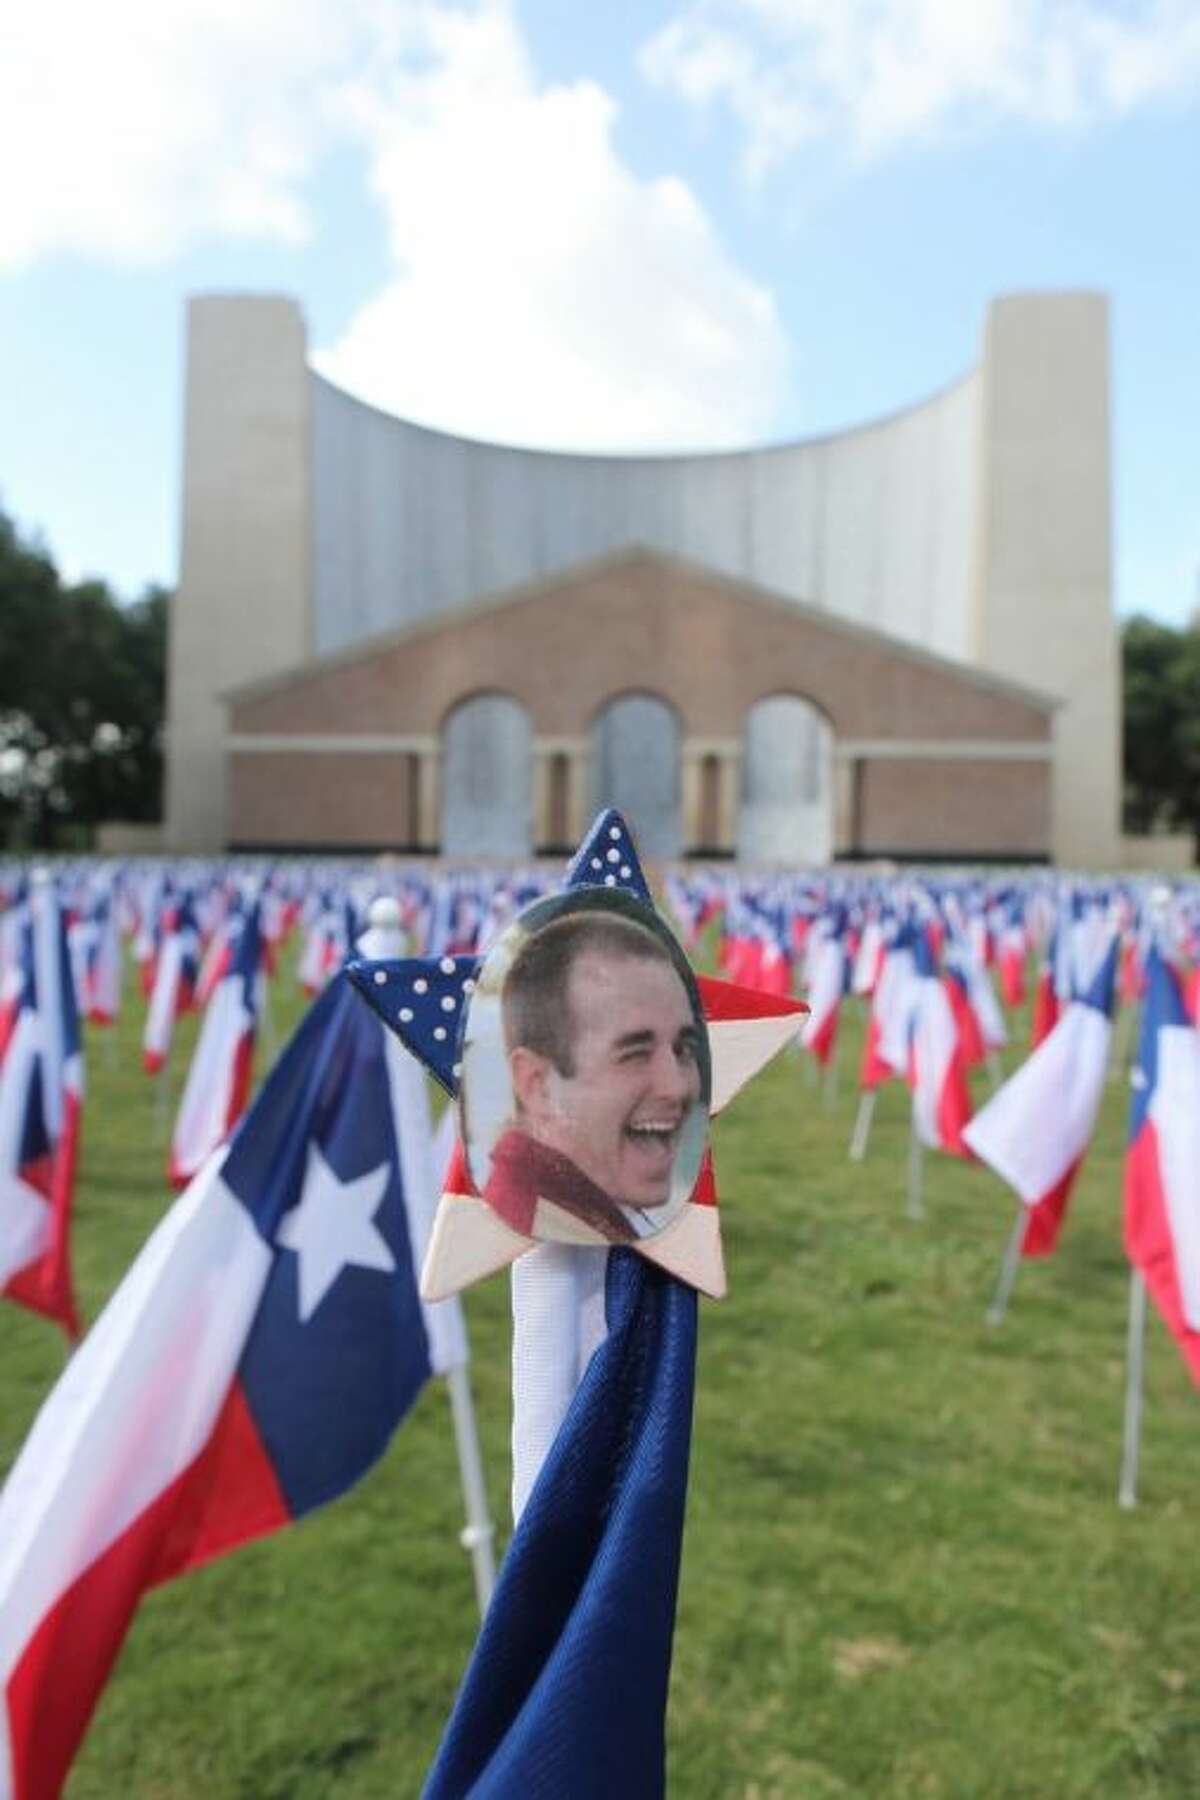 Aaron Pennywell's picture sits on top a Texas flag along with 1,170 Texas flags representing all the lives lost last year to drunk driving in front of the Gerald Hines Waterwall Park in Houston. Pennywell was killed by a drunk driver who ran a stop light and struck his vehicle on June 25, 2011.